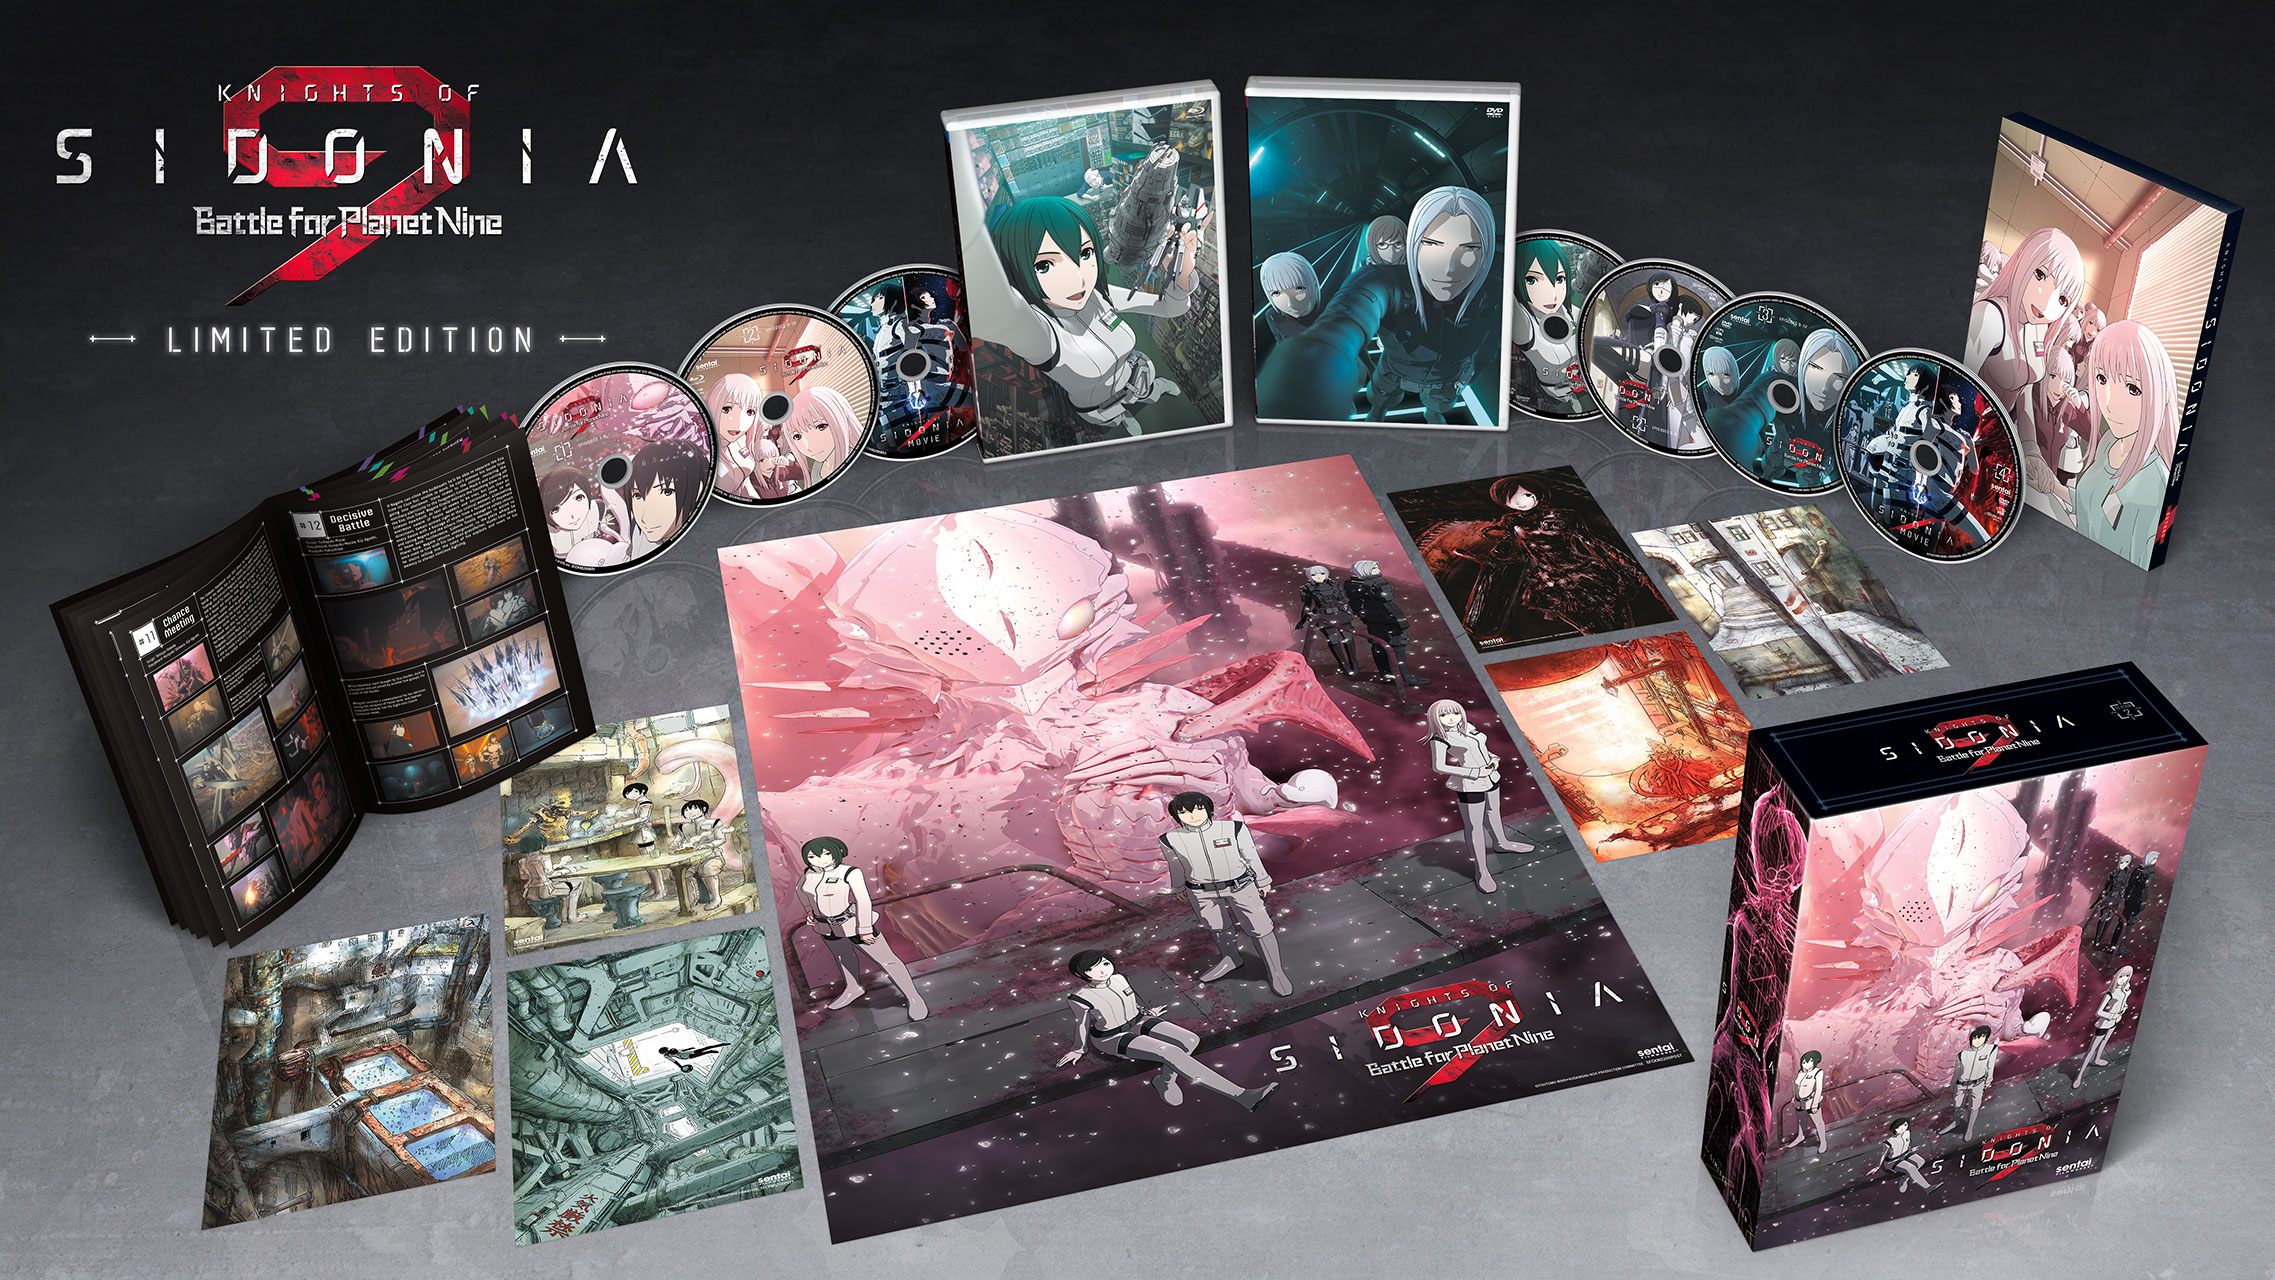 Knights of Sidonia 2: Battle for Planet Nine Premium Box  Set Reveal